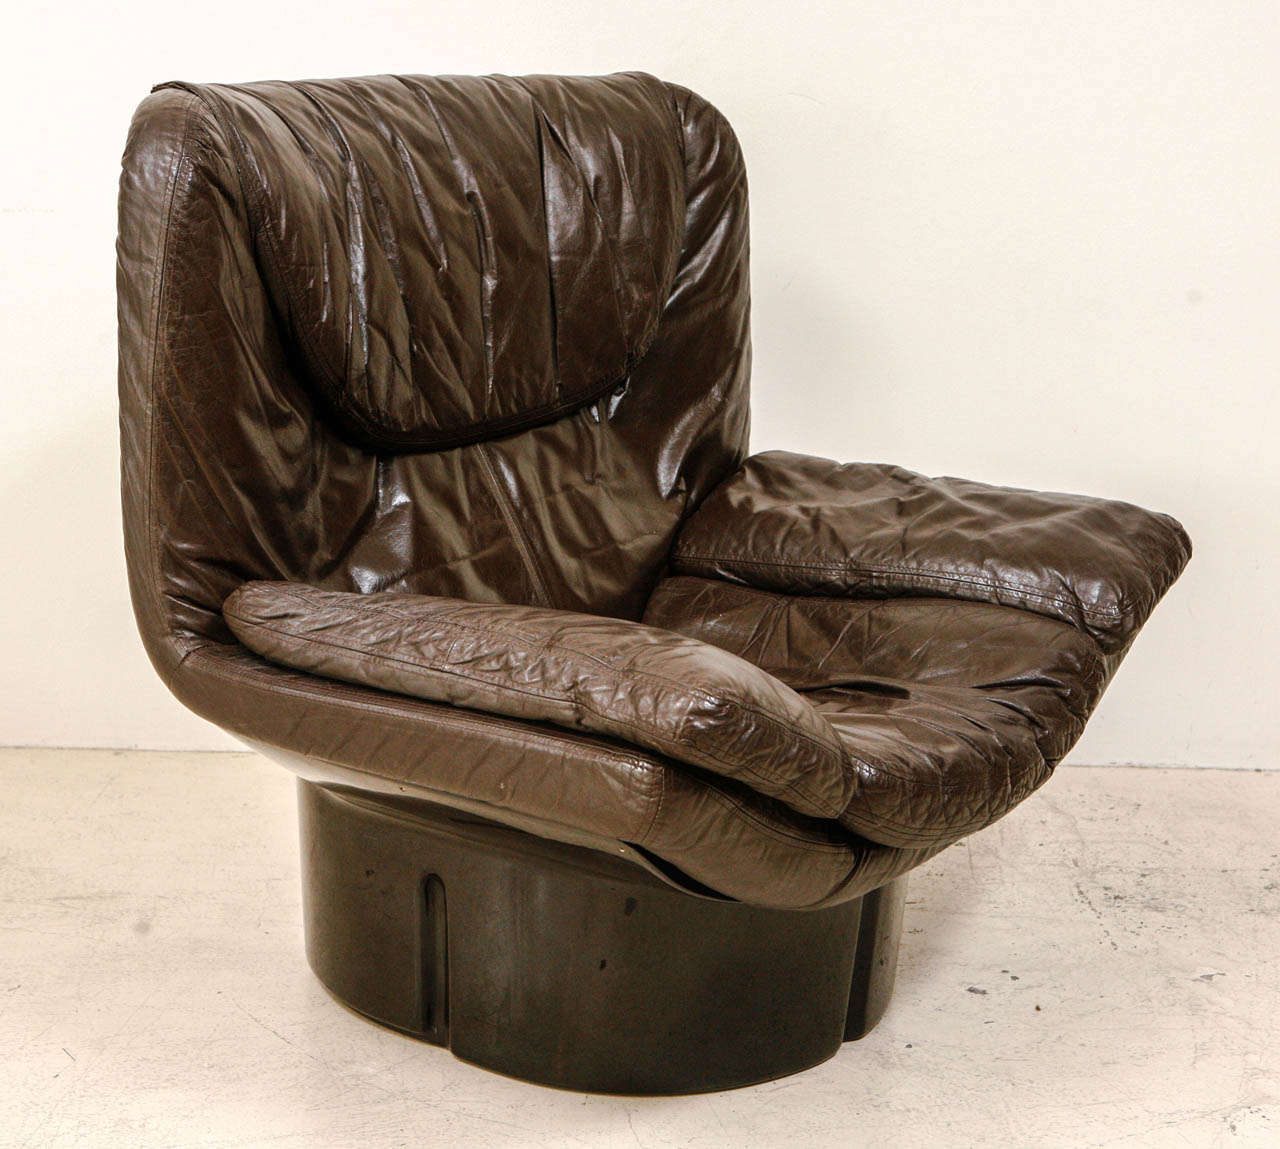 Late 20th Century Lounge Chair by Comfort designed by T.Ammannati & G.P Viitelli